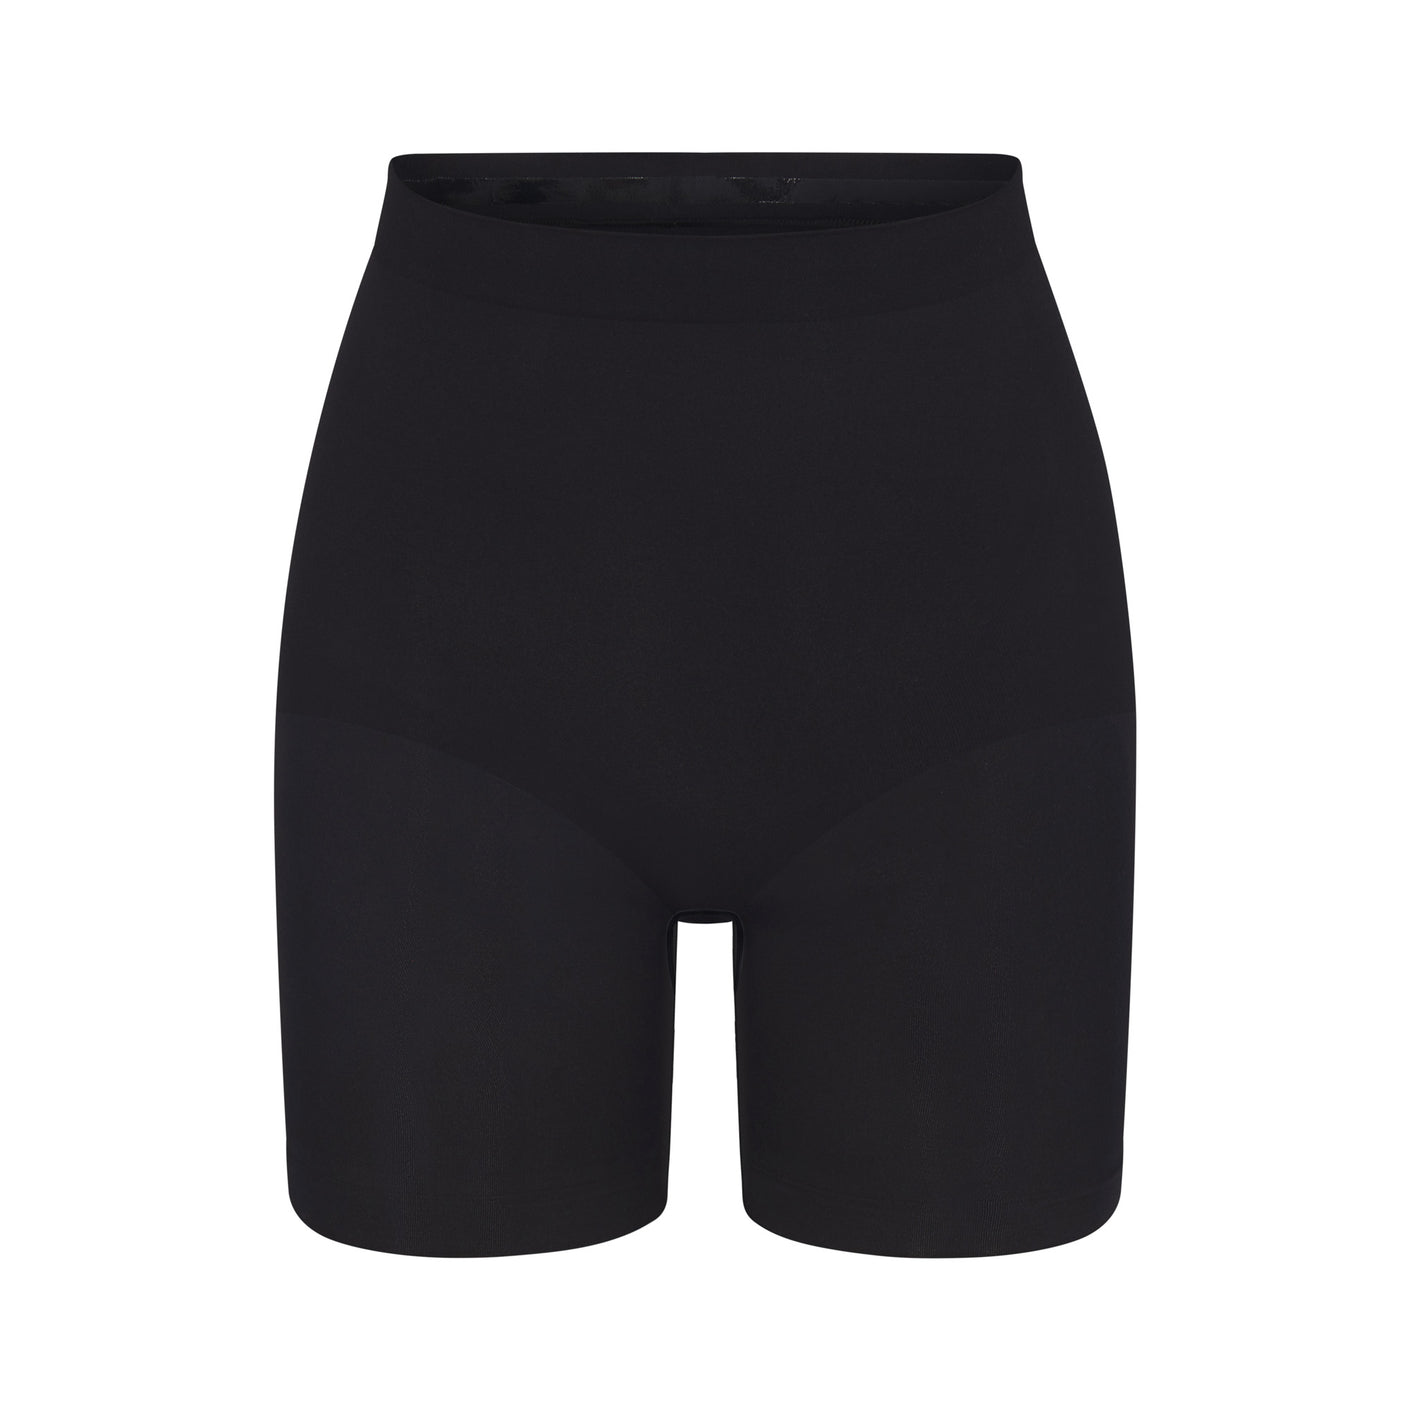 Buy SPANX® Shaping Satin Tummy Black Control Shorts from the Next UK online  shop